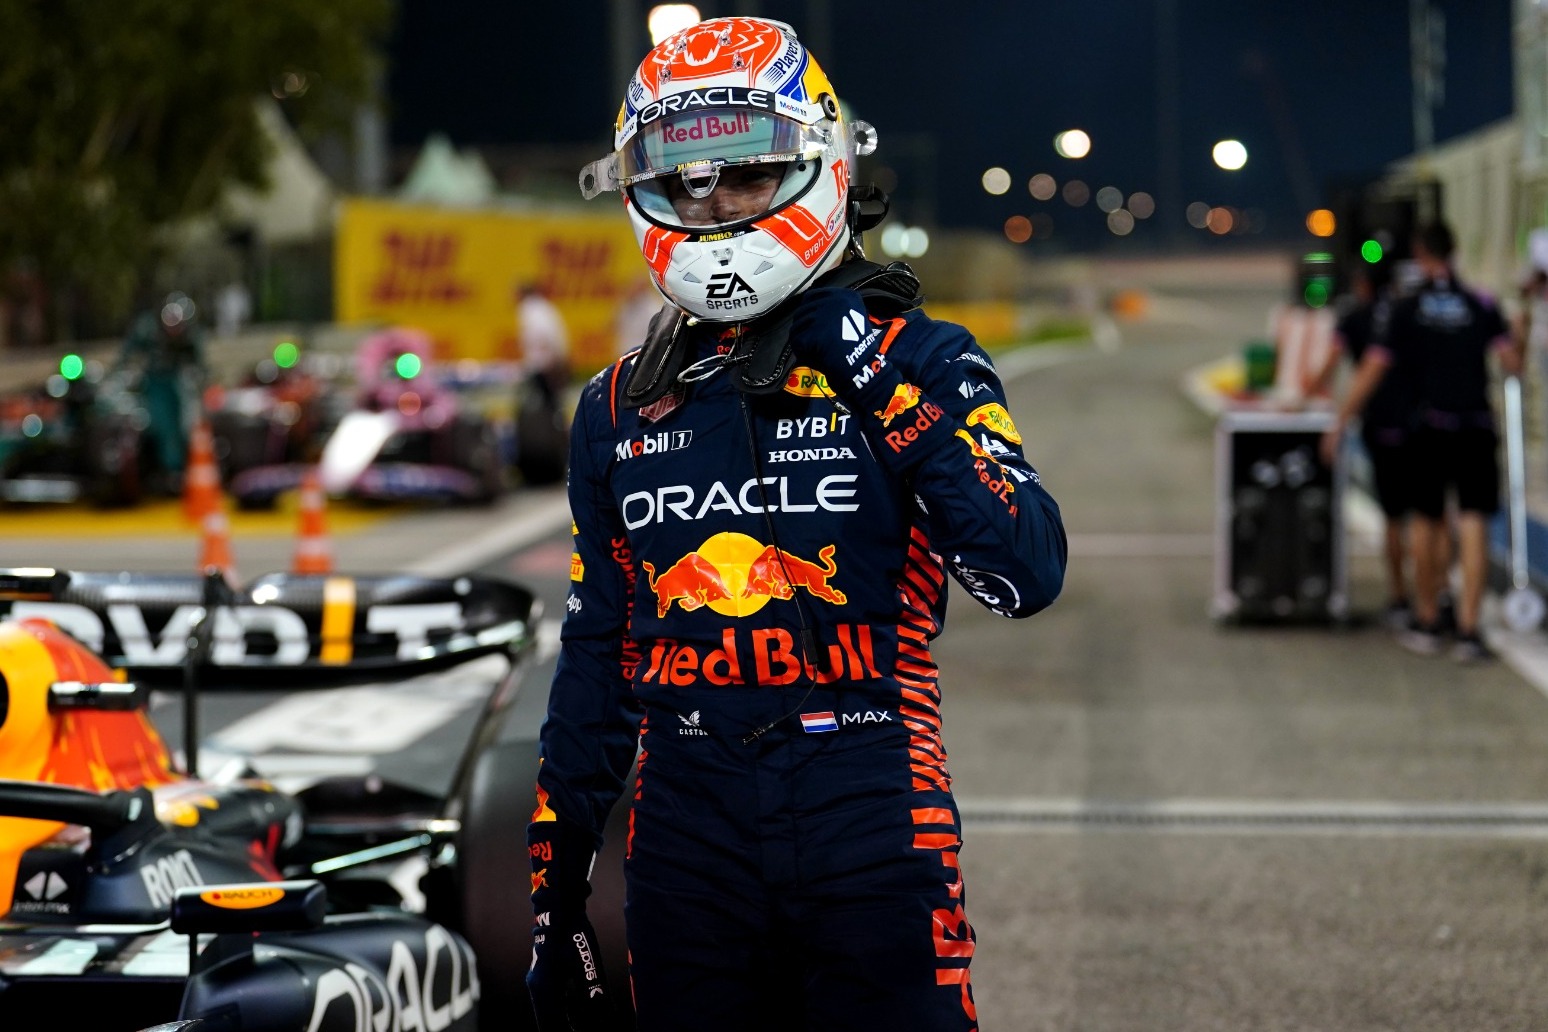 Reigning champion Max Verstappen takes pole for season-opening Bahrain GP 